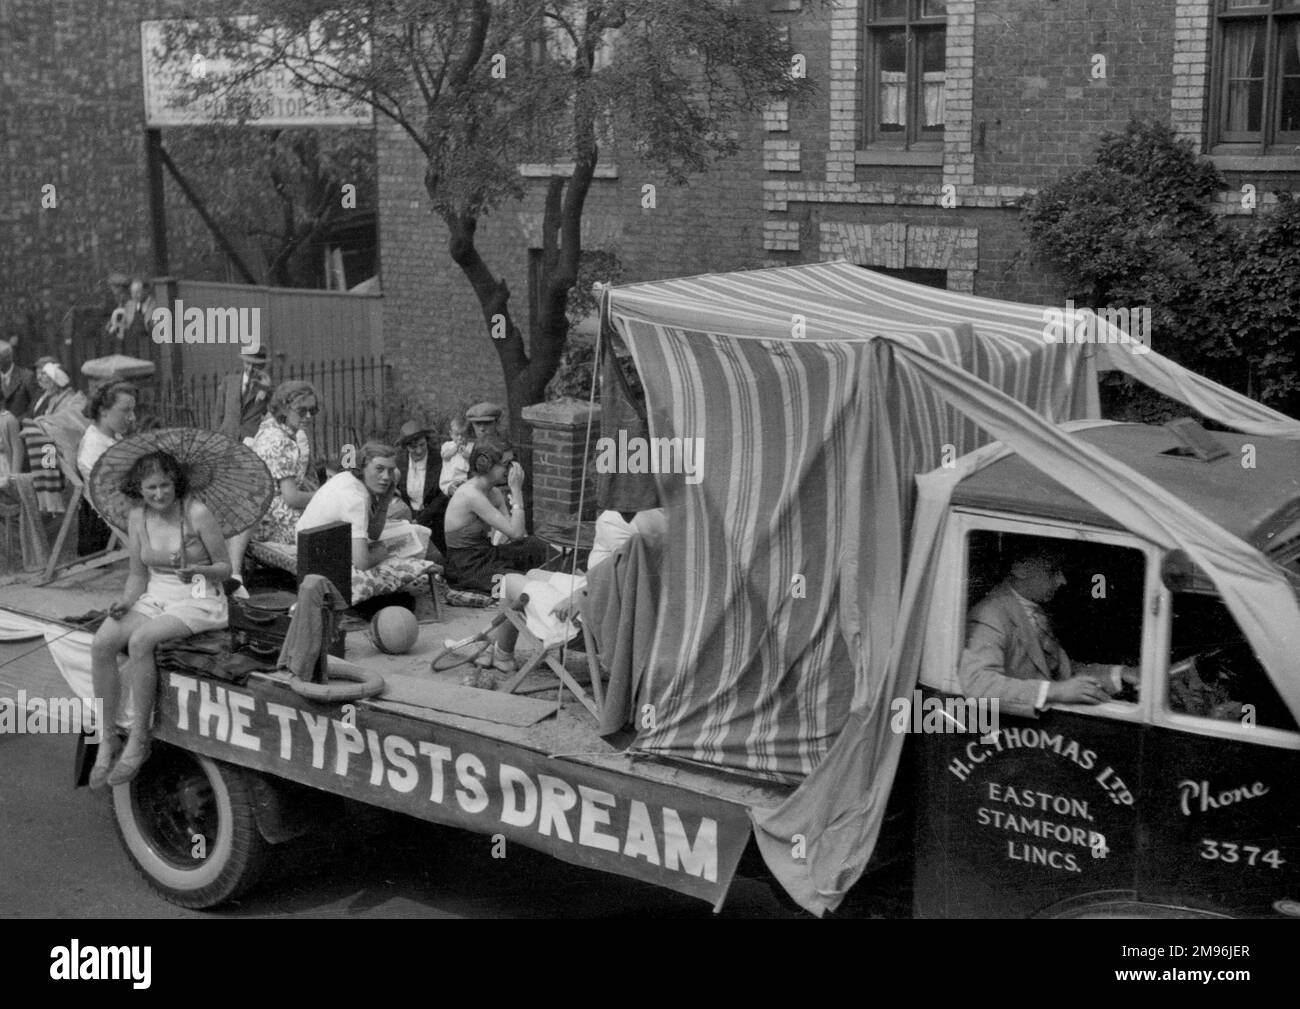 Carnival float, The Typist's Dream, showing young women in holiday attire, as if on a beach, rather than sitting in an office typing.  The van pulling the float belongs to H C Thomas Ltd of Easton, Stamford, Lincolnshire. Stock Photo